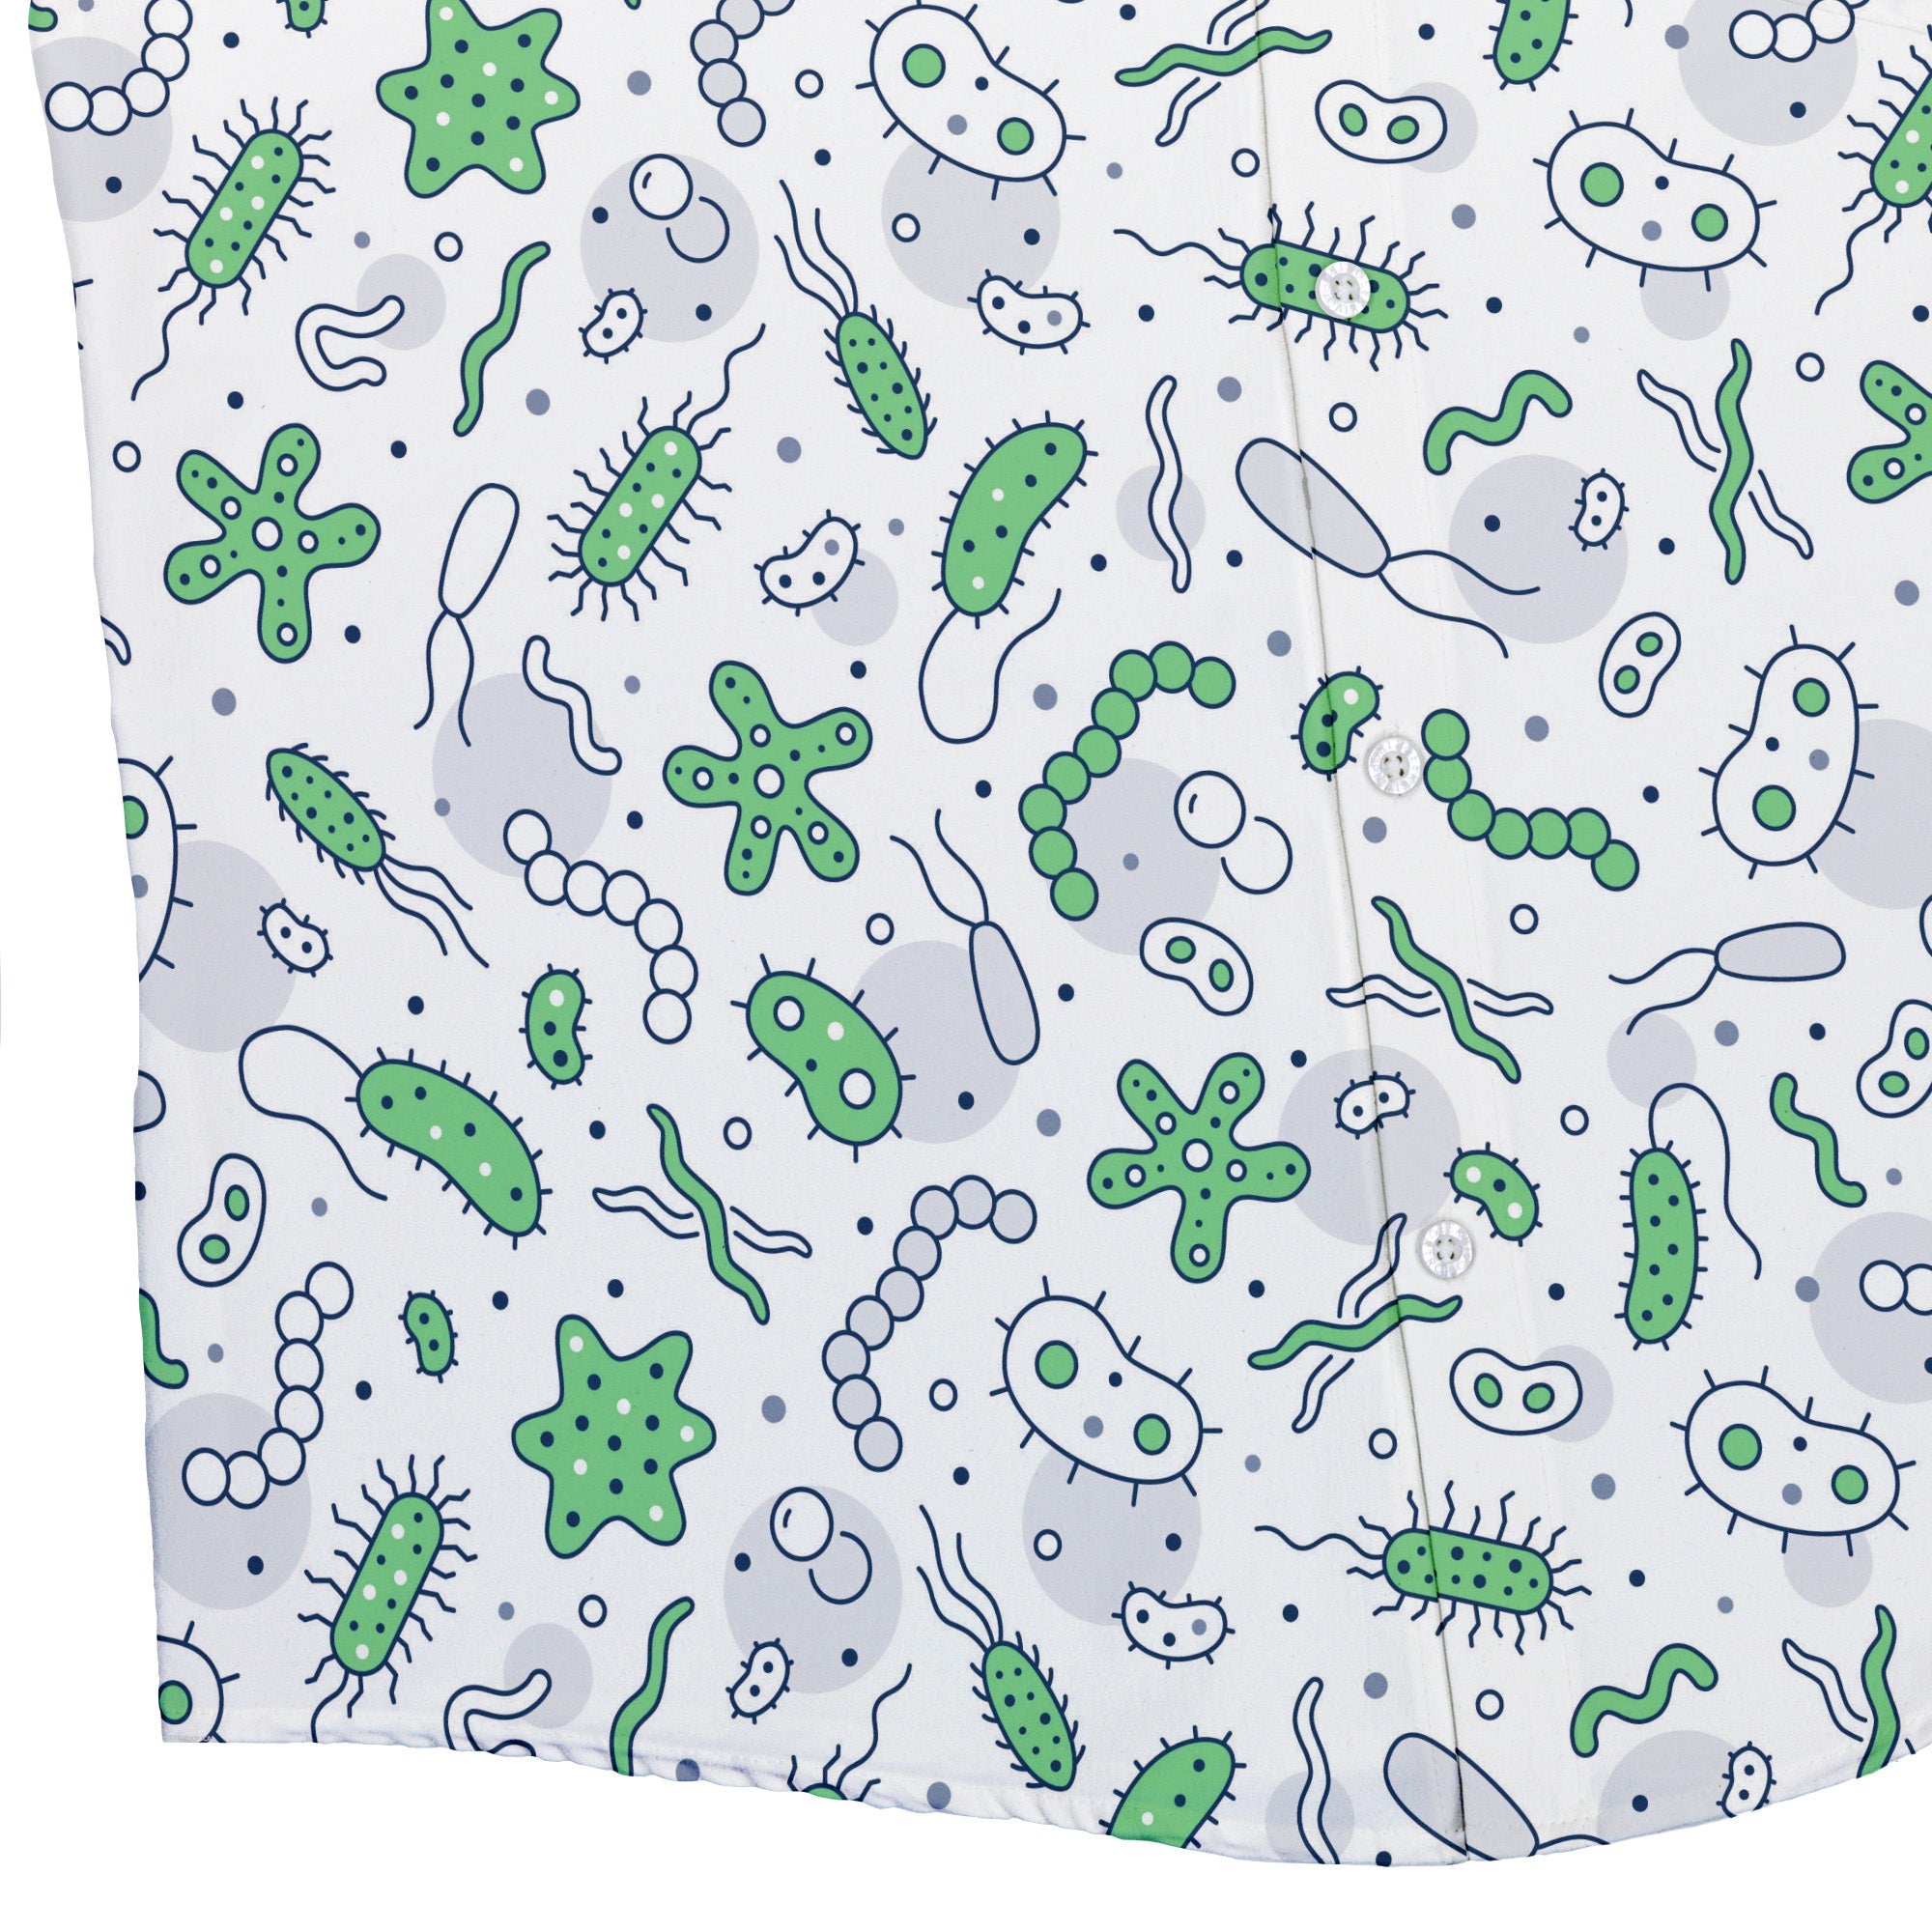 Science Green Microbes White Button Up Shirt - adult sizing - science print -